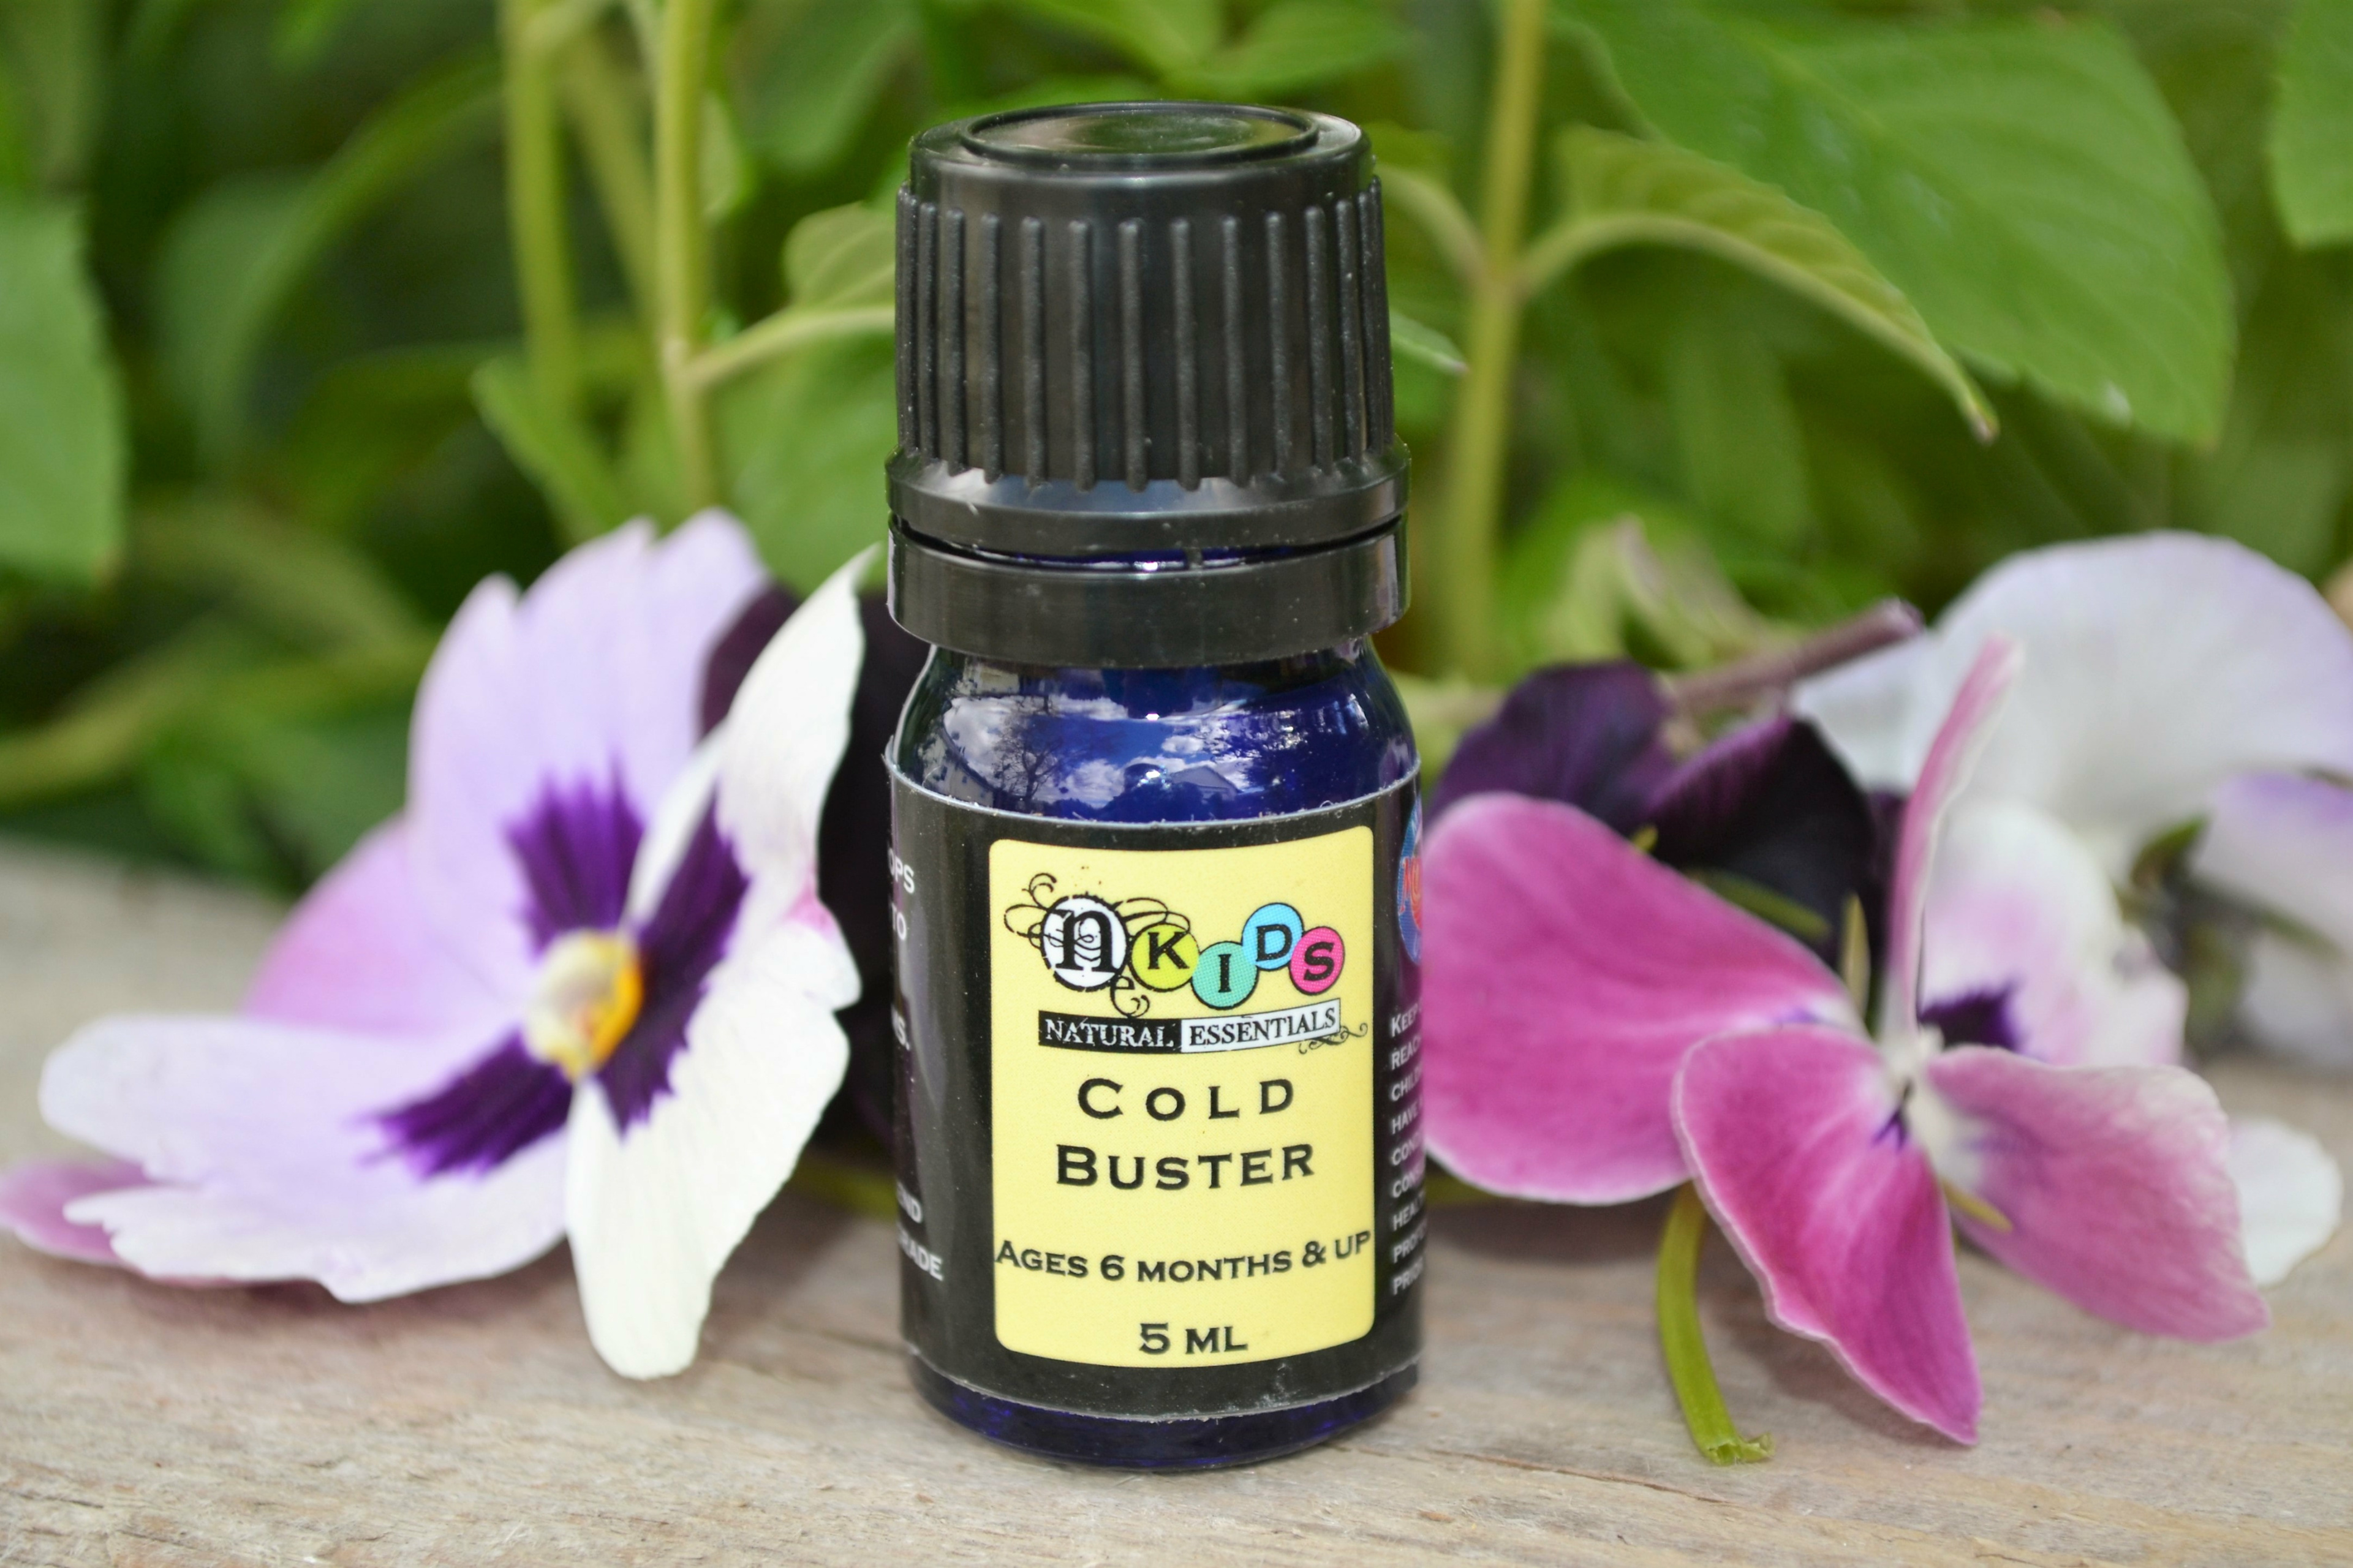 Kids' Cold Buster Diffuser Oils